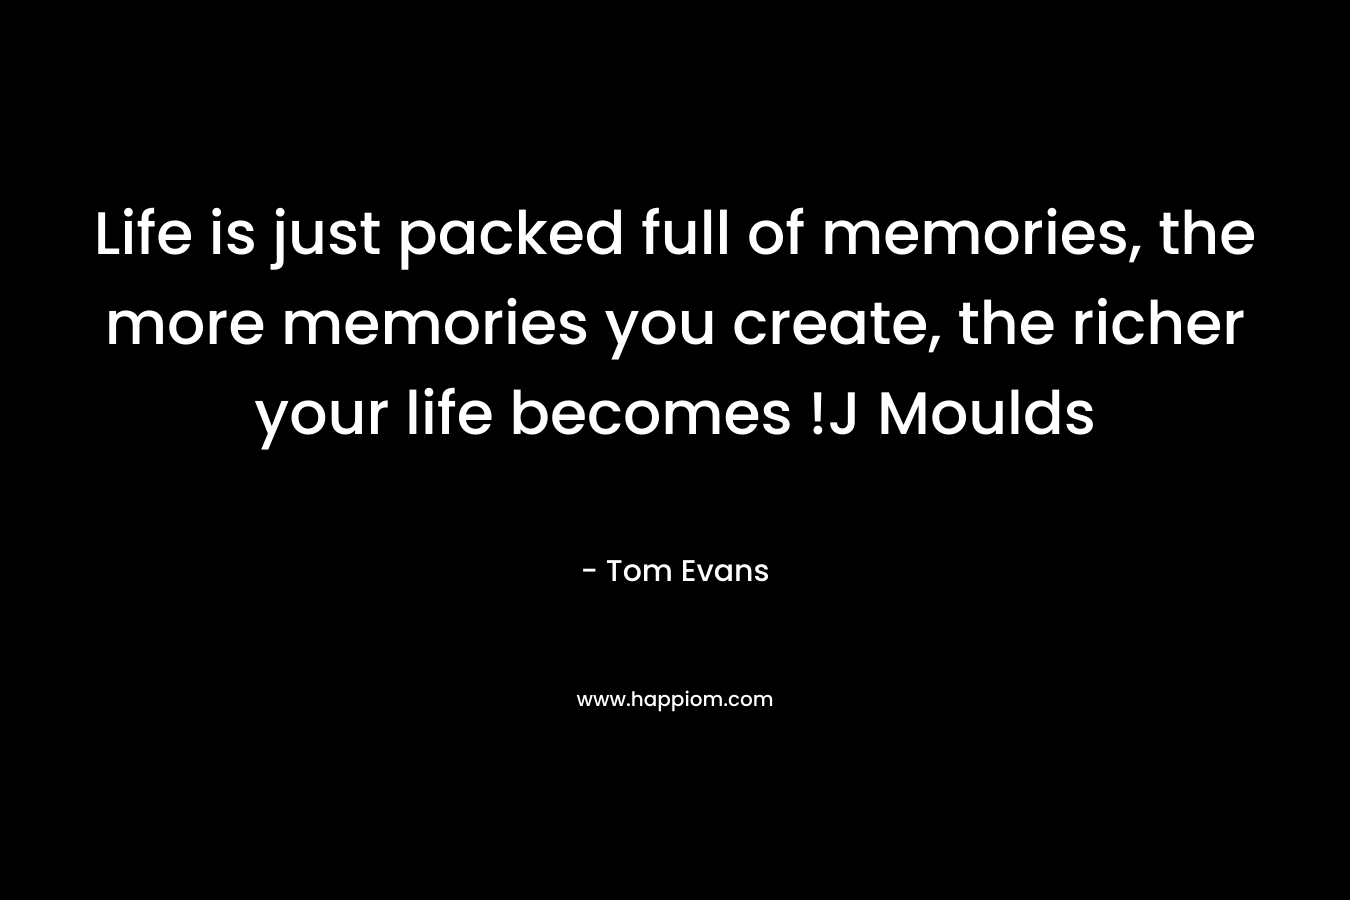 Life is just packed full of memories, the more memories you create, the richer your life becomes !J Moulds